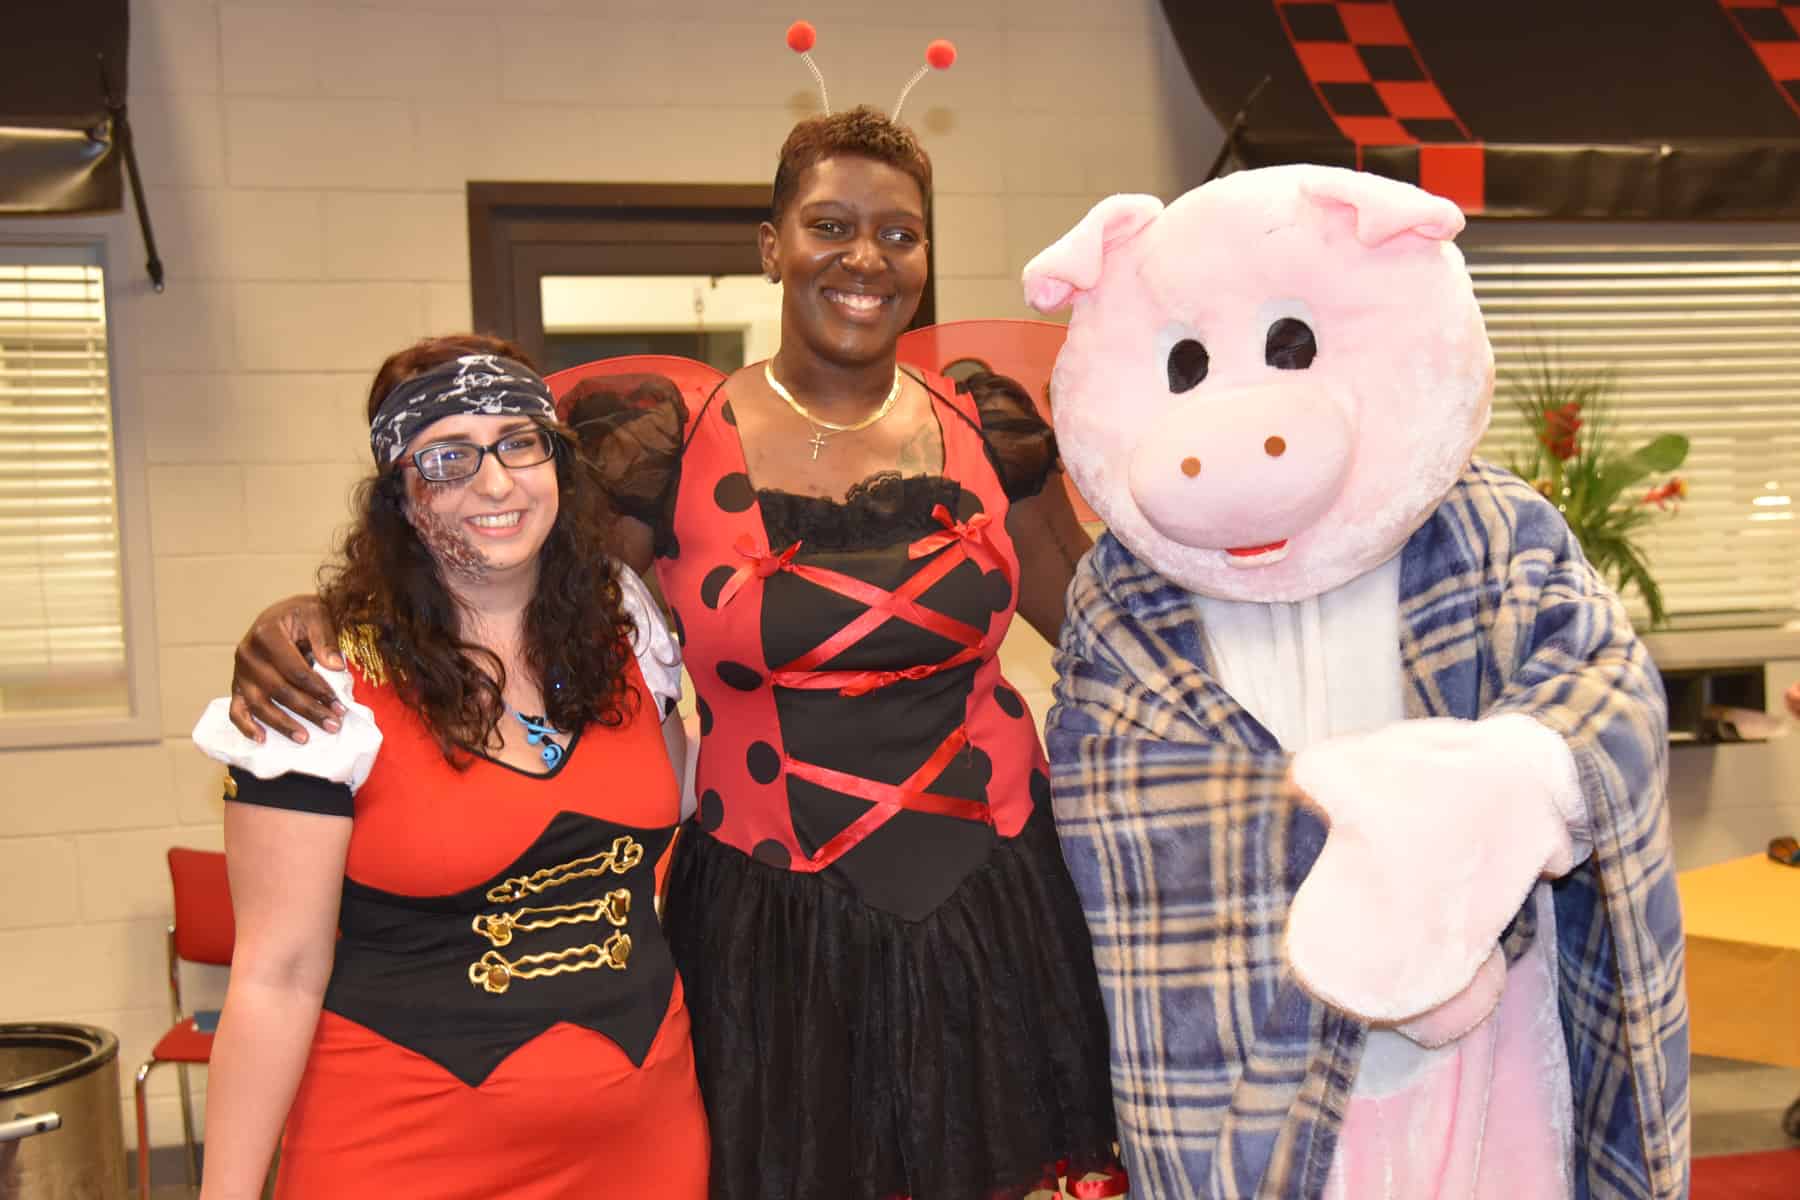 Winners of SGTC’s Halloween Costume Contest for the Americus campus are pictured from left to right: Destiny Baker, Burnt Pirate, first place; Andrea Burton-Willis, Ladybug, second place; and Brennan Morris, Pig in a Blanket, third place.